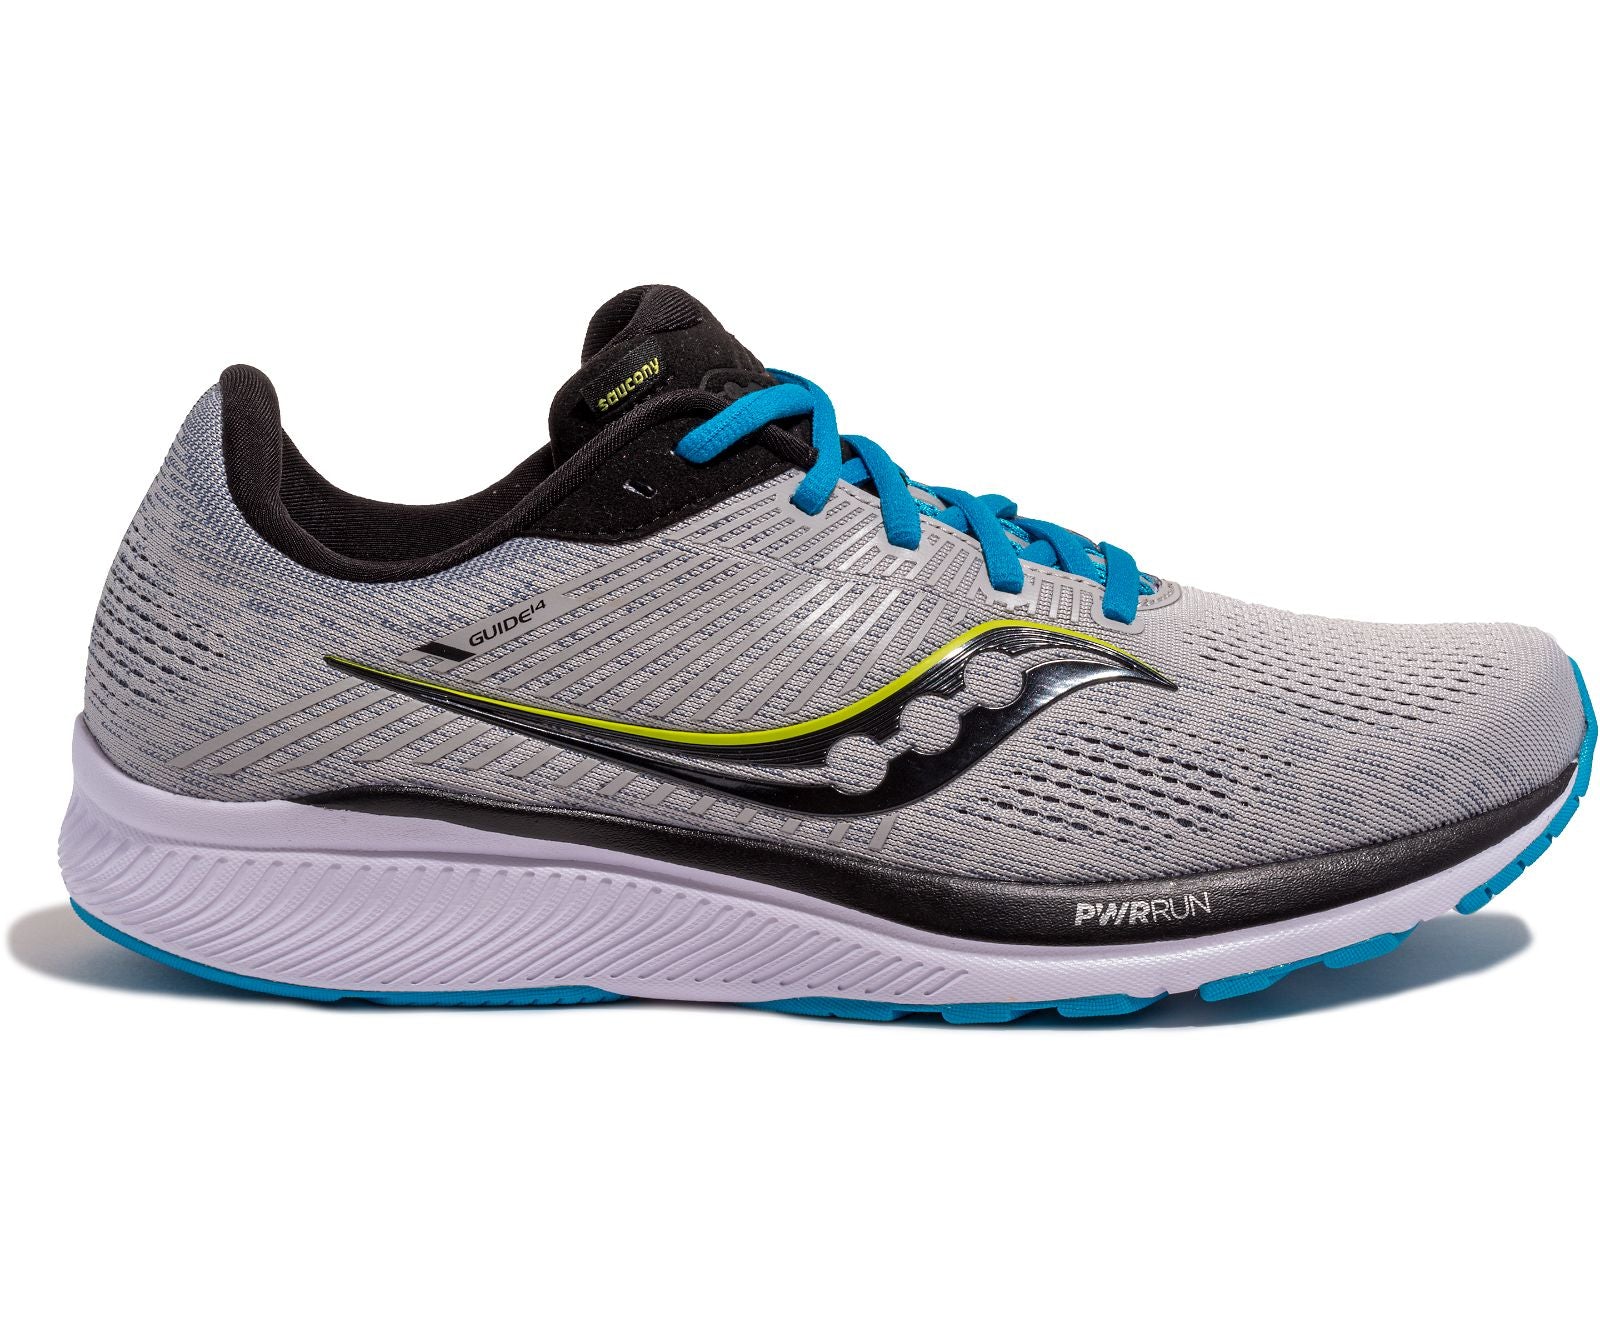 Saucony Men's Guide 14 Wide Stability Road Running Shoe